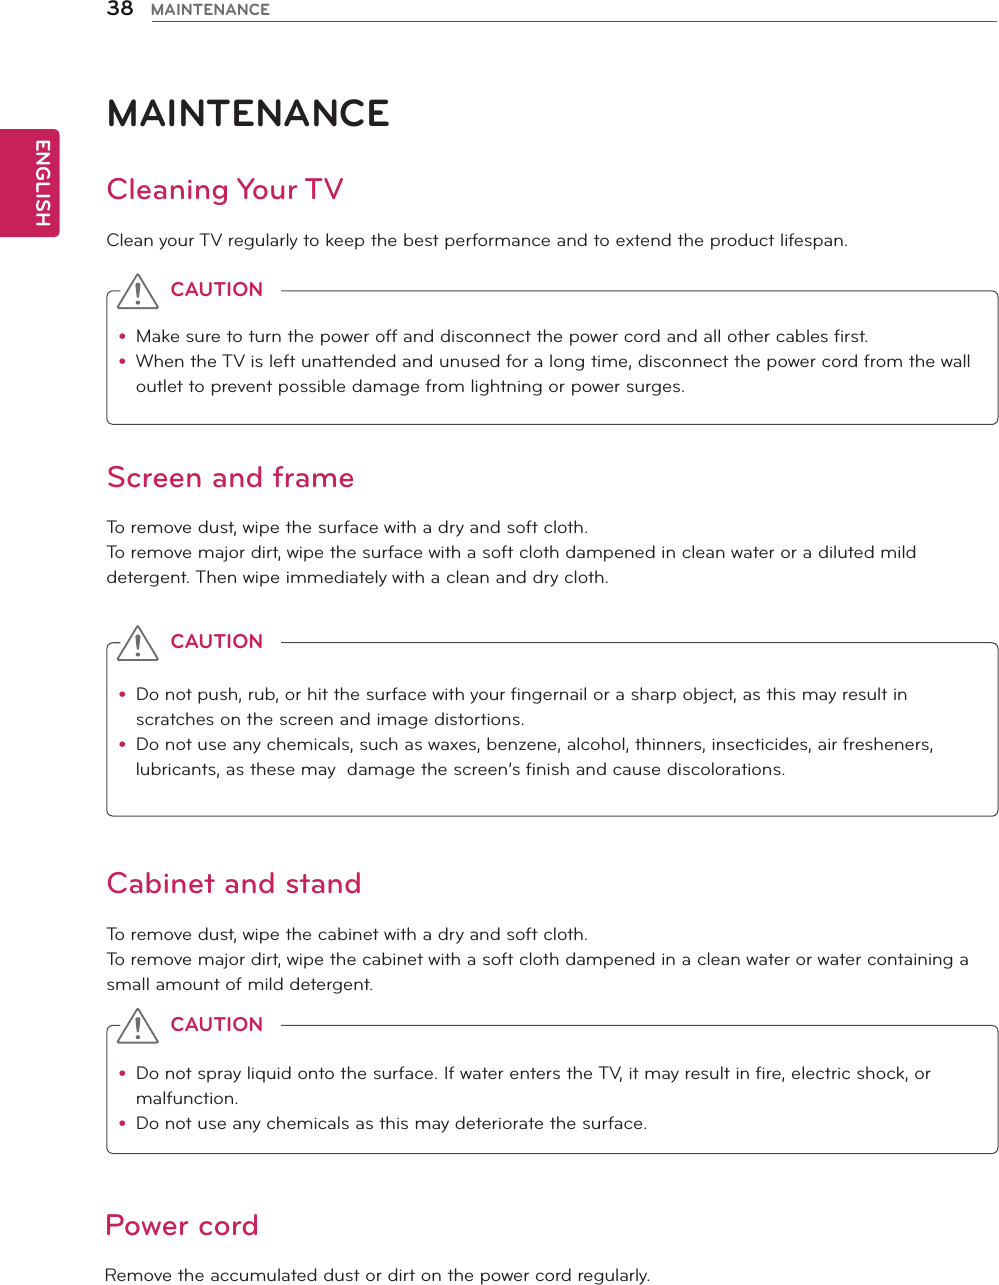 ENGLISH38 MAINTENANCEMAINTENANCECleaning Your TVClean your TV regularly to keep the best performance and to extend the product lifespan.Screen and frameTo remove dust, wipe the surface with a dry and soft cloth.To remove major dirt, wipe the surface with a soft cloth dampened in clean water or a diluted mild detergent. Then wipe immediately with a clean and dry cloth.Cabinet and standTo remove dust, wipe the cabinet with a dry and soft cloth.To remove major dirt, wipe the cabinet with a soft cloth dampened in a clean water or water containing a small amount of mild detergent.Power cordRemove the accumulated dust or dirt on the power cord regularly. y Make sure to turn the power off and disconnect the power cord and all other cables first.y When the TV is left unattended and unused for a long time, disconnect the power cord from the wall outlet to prevent possible damage from lightning or power surges.y Do not push, rub, or hit the surface with your fingernail or a sharp object, as this may result in scratches on the screen and image distortions.y Do not use any chemicals, such as waxes, benzene, alcohol, thinners, insecticides, air fresheners, lubricants, as these may  damage the screen’s finish and cause discolorations.y Do not spray liquid onto the surface. If water enters the TV, it may result in fire, electric shock, or malfunction.y Do not use any chemicals as this may deteriorate the surface.CAUTIONCAUTIONCAUTION